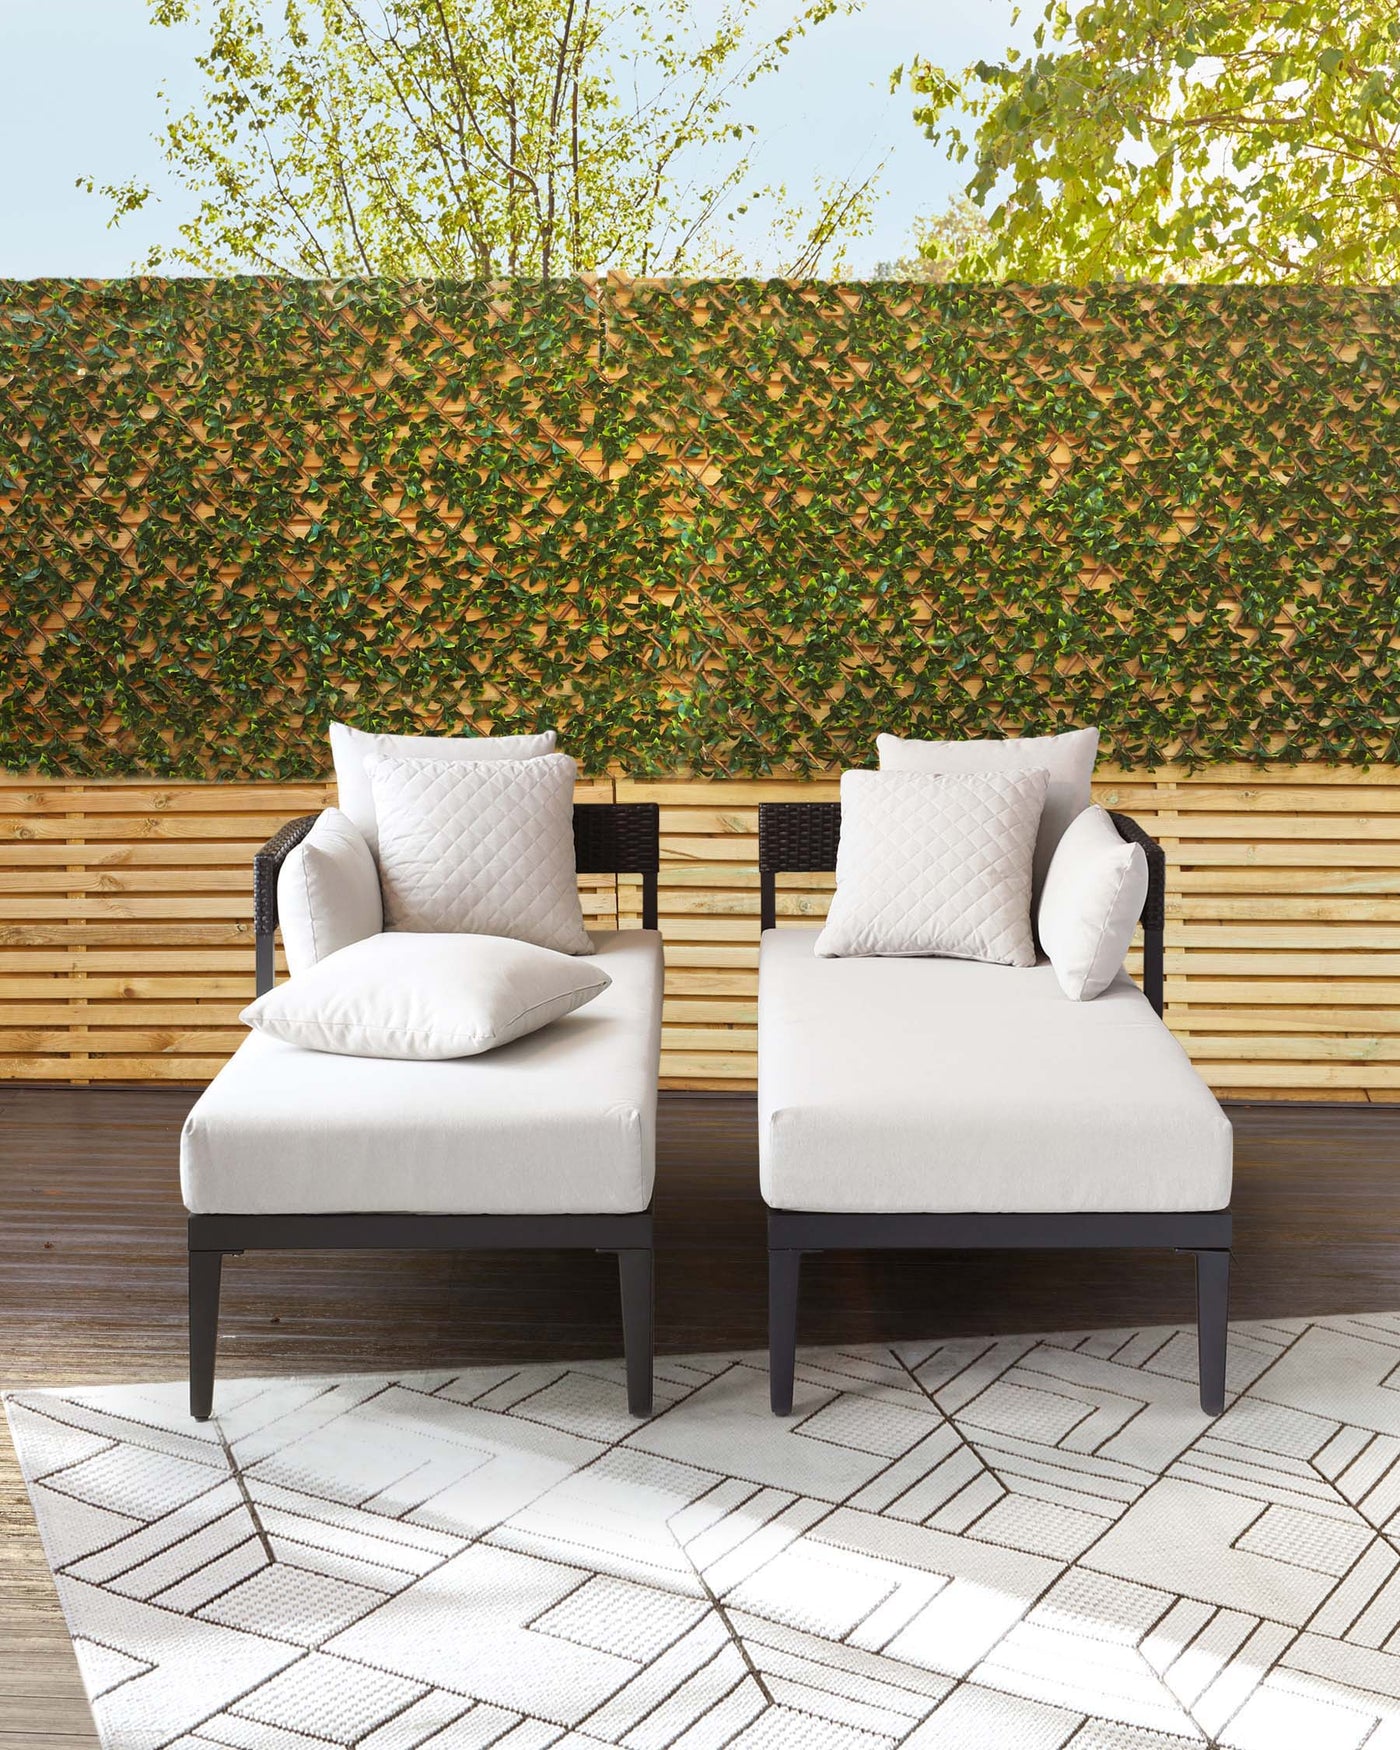 Modern outdoor furniture set featuring two armless, cushioned chairs with dark wooden frames and white upholstery, complemented by matching accent pillows on a geometric-patterned outdoor rug.